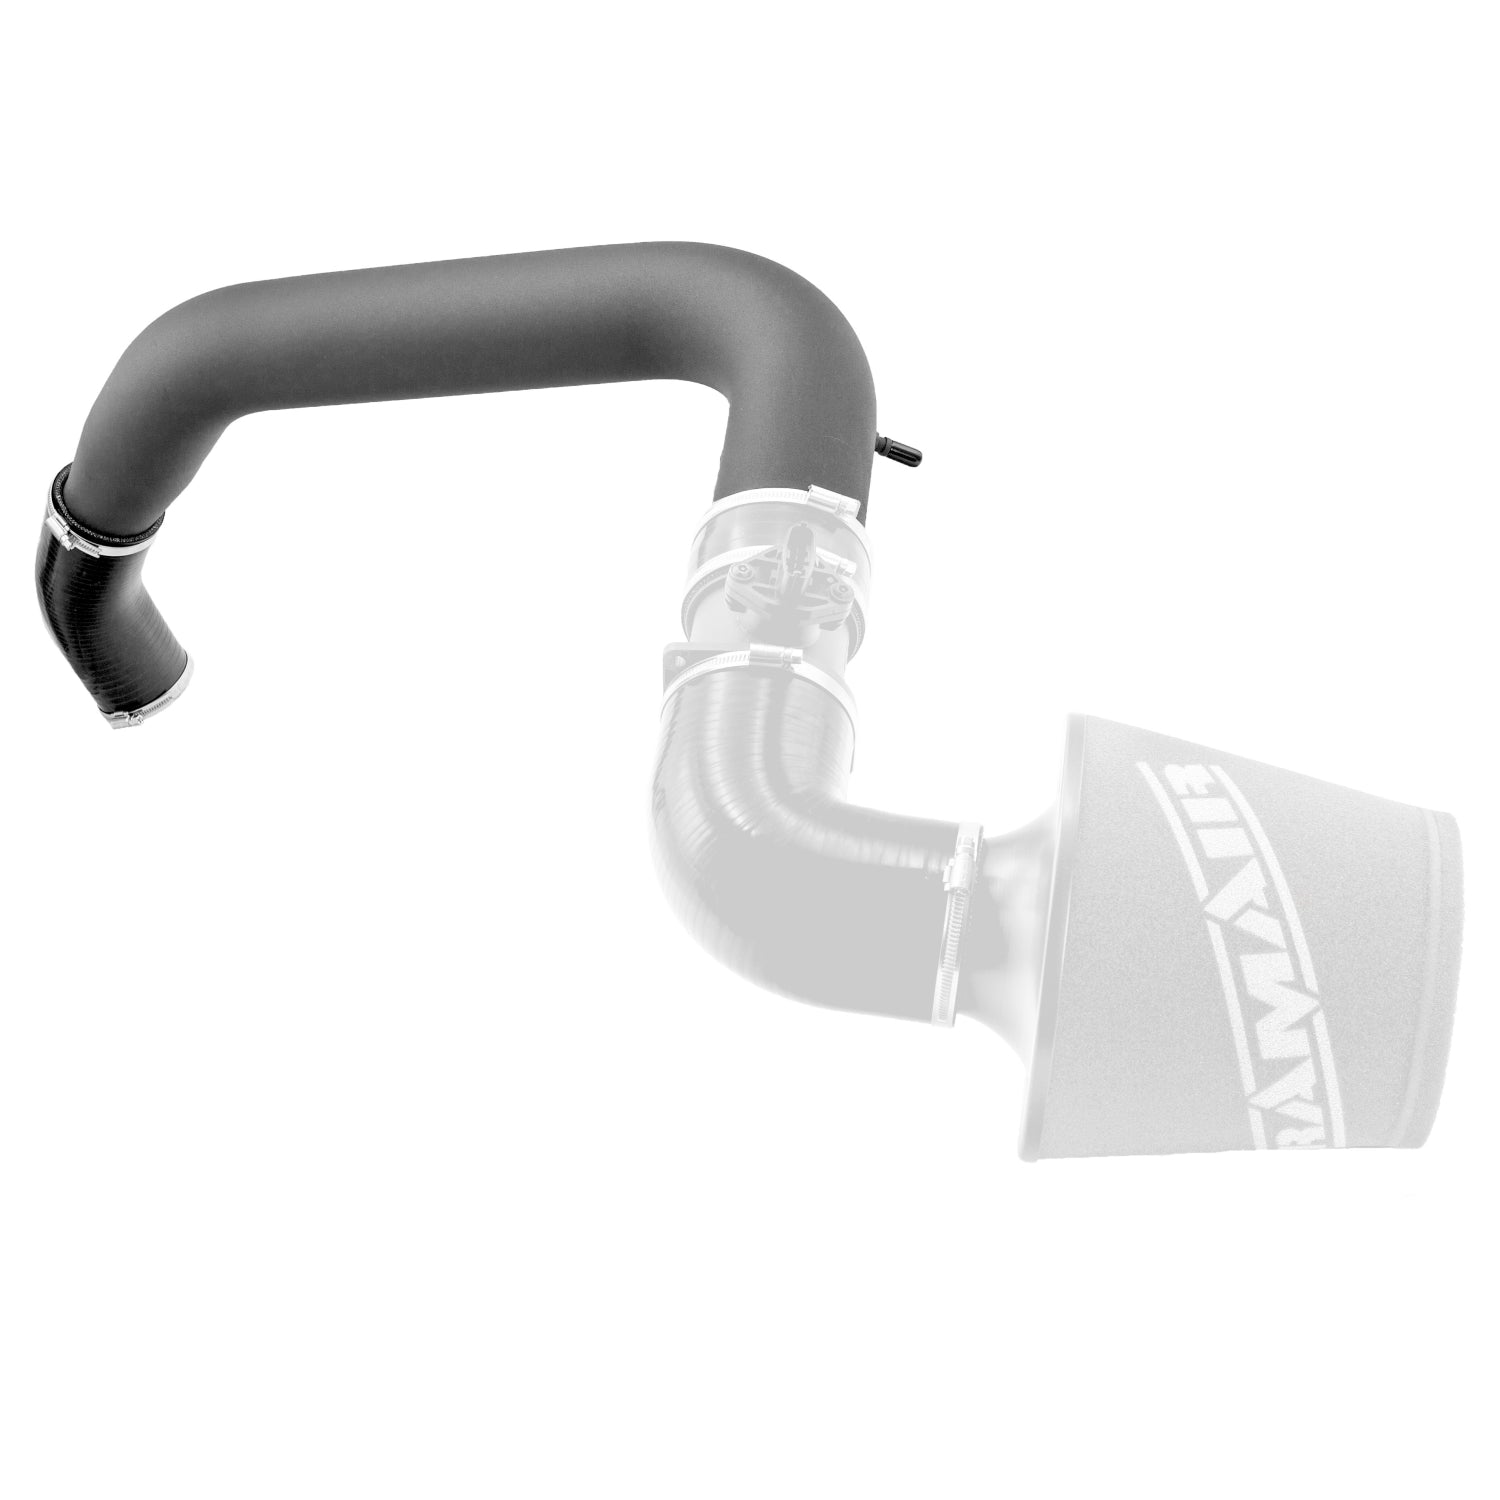 Crossover Turbo Intake Hard Pipe for Ford Focus ST 225